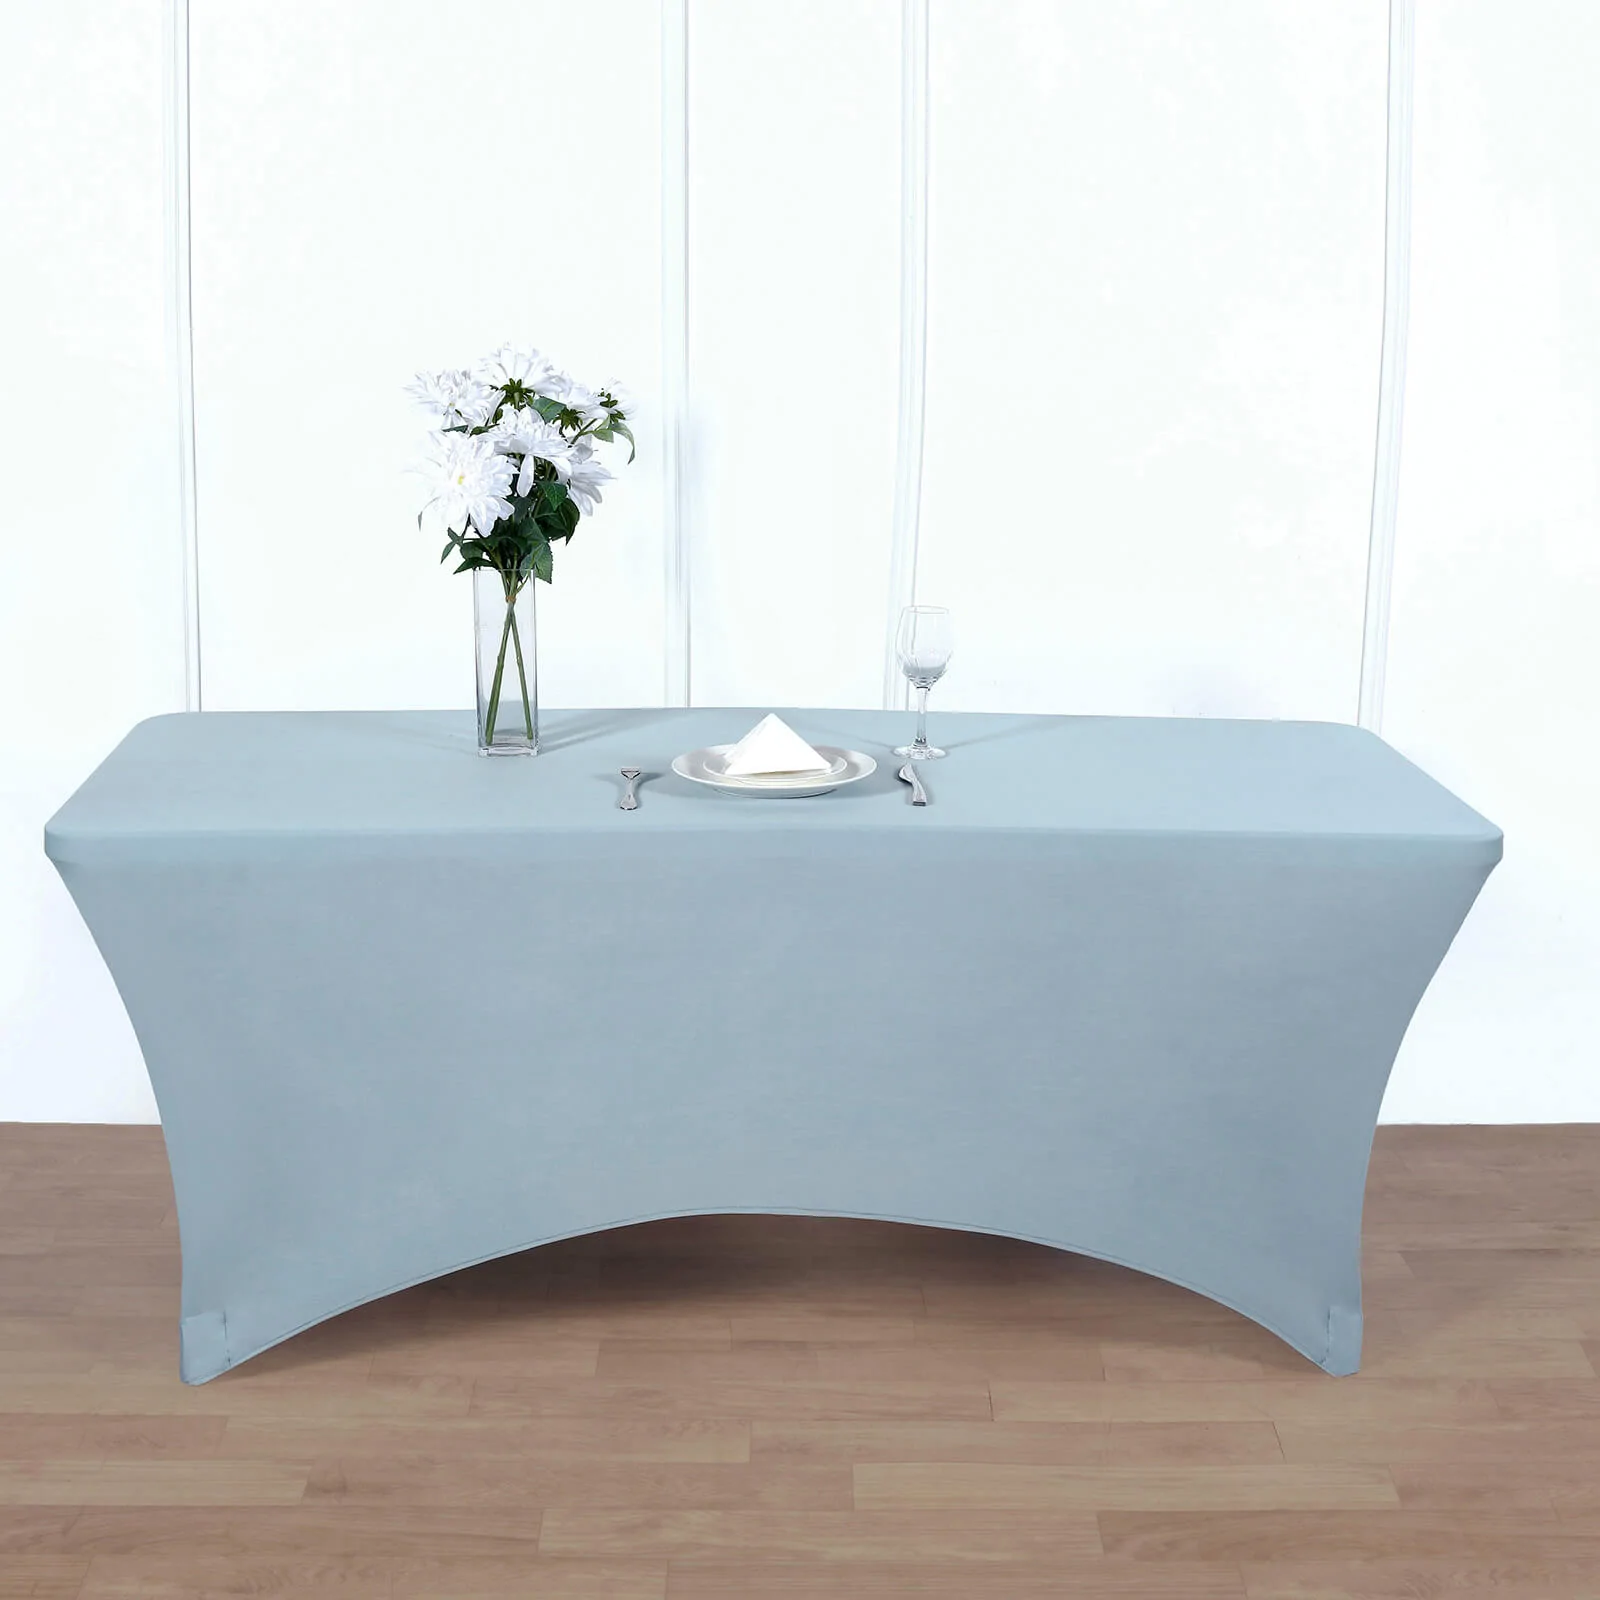 Dusty Blue - 6 Ft Rectangular Spandex Table Cover Wedding Party - $33.88